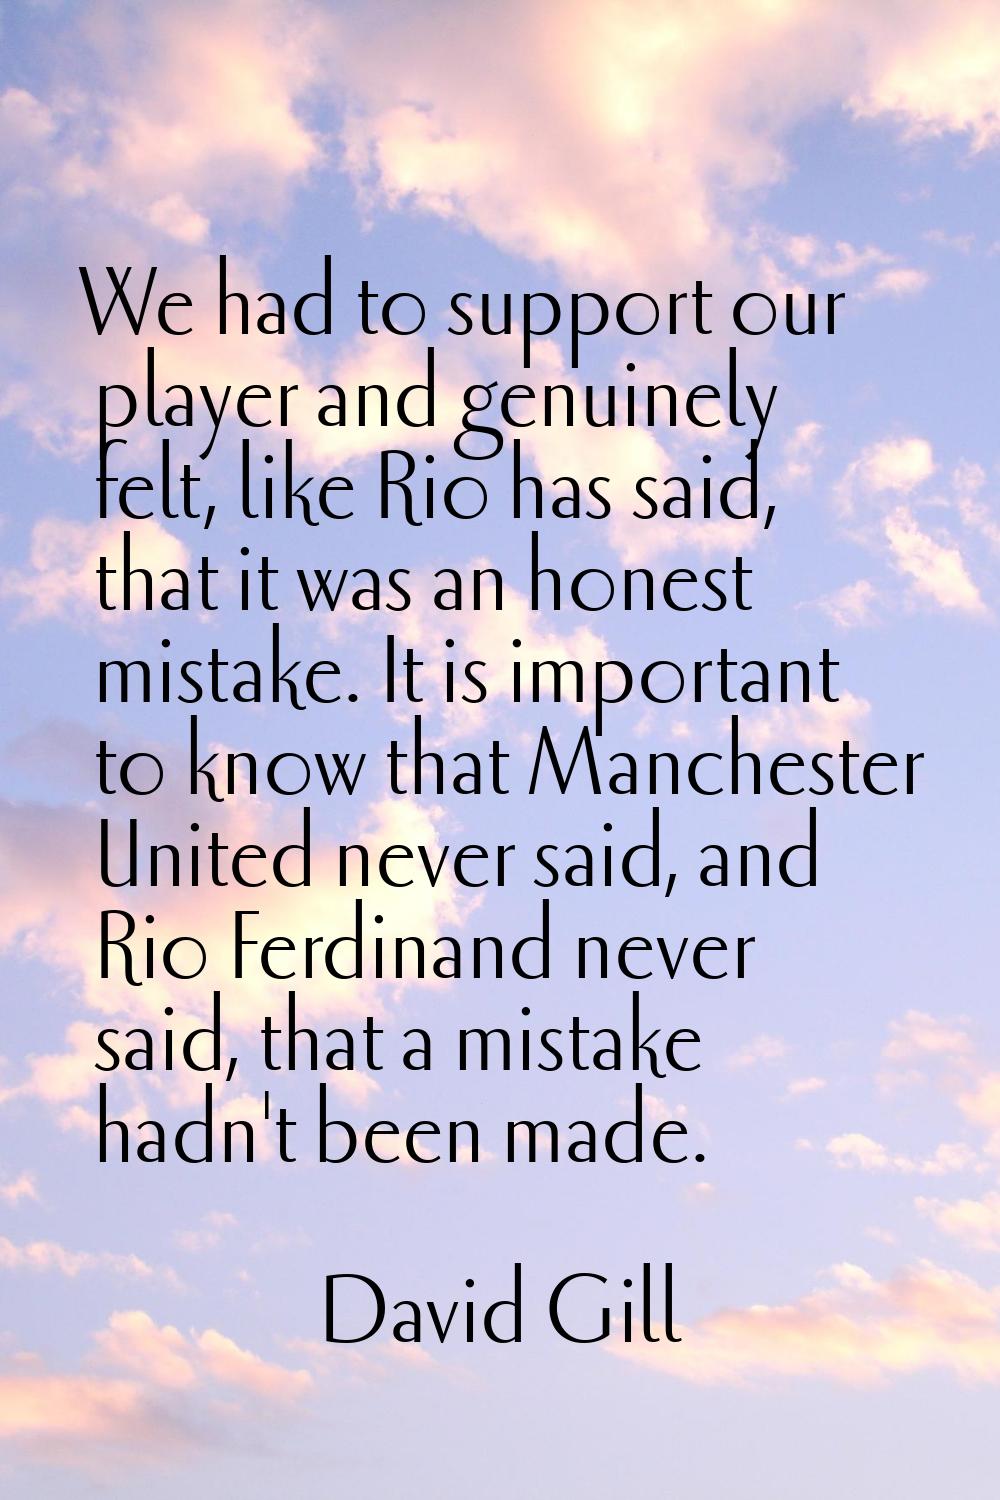 We had to support our player and genuinely felt, like Rio has said, that it was an honest mistake. 